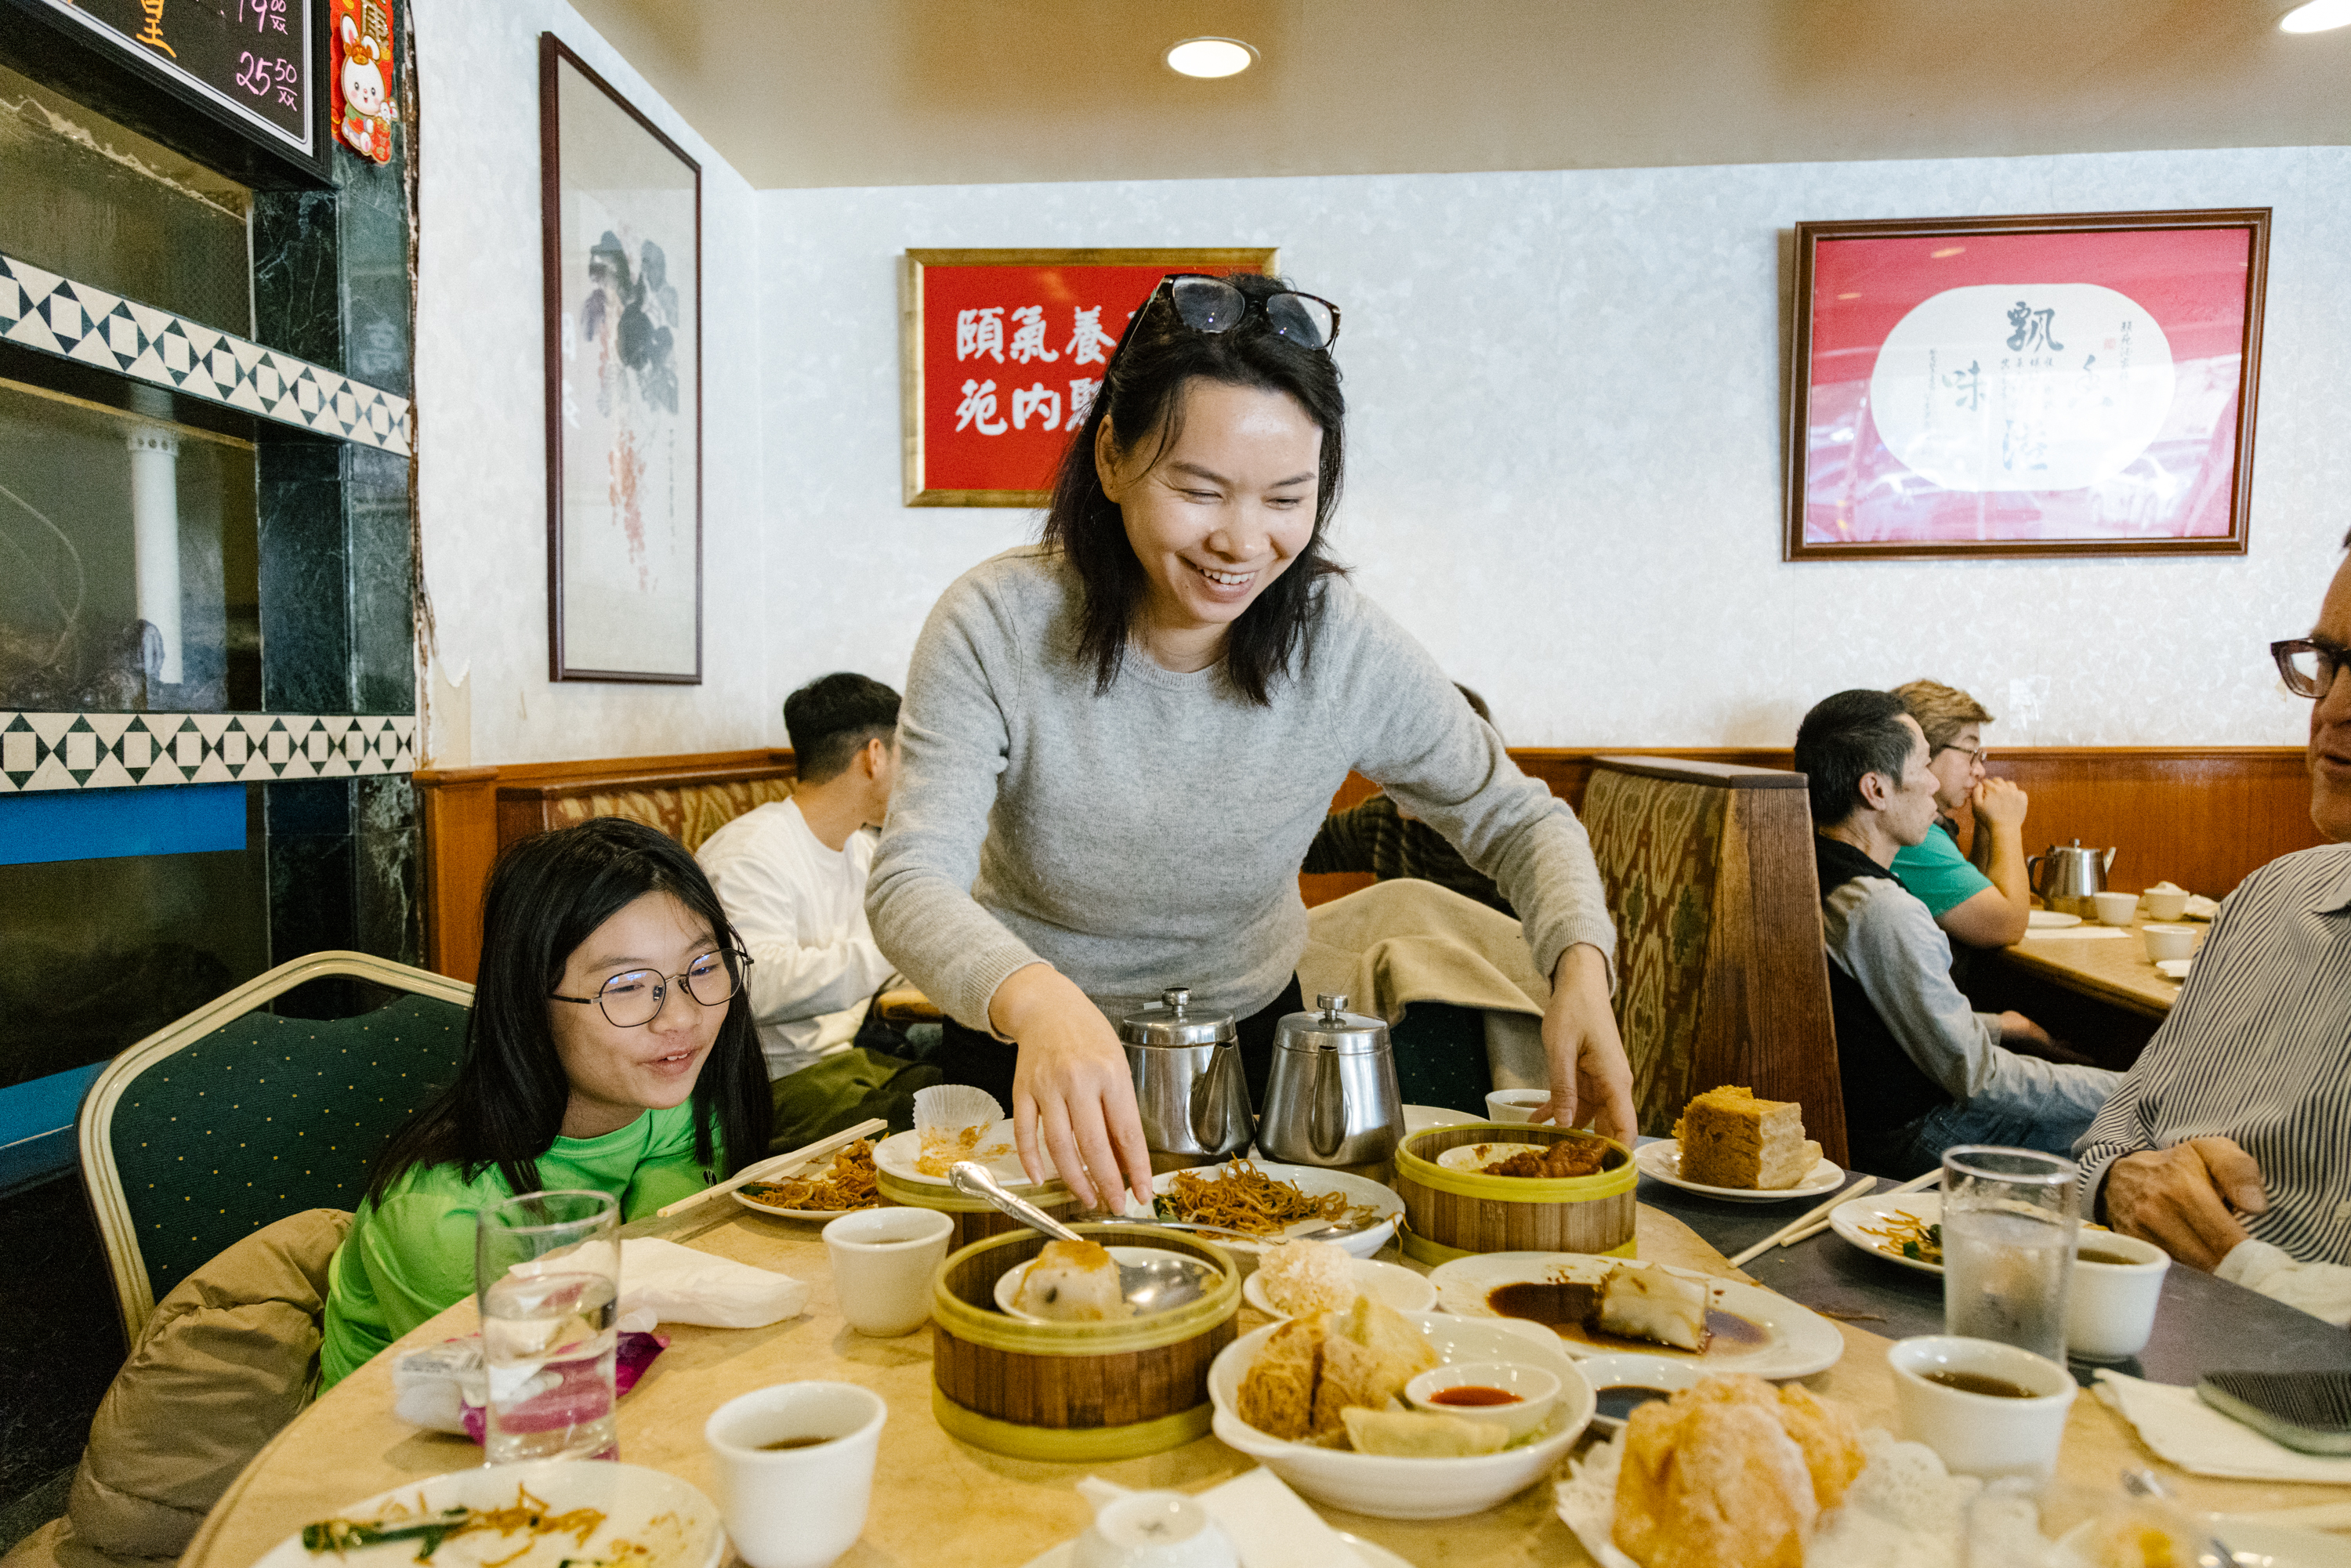 A woman serves dim sum at a busy restaurant table where a child looks on eagerly. Cups of tea and various Chinese dishes abound.